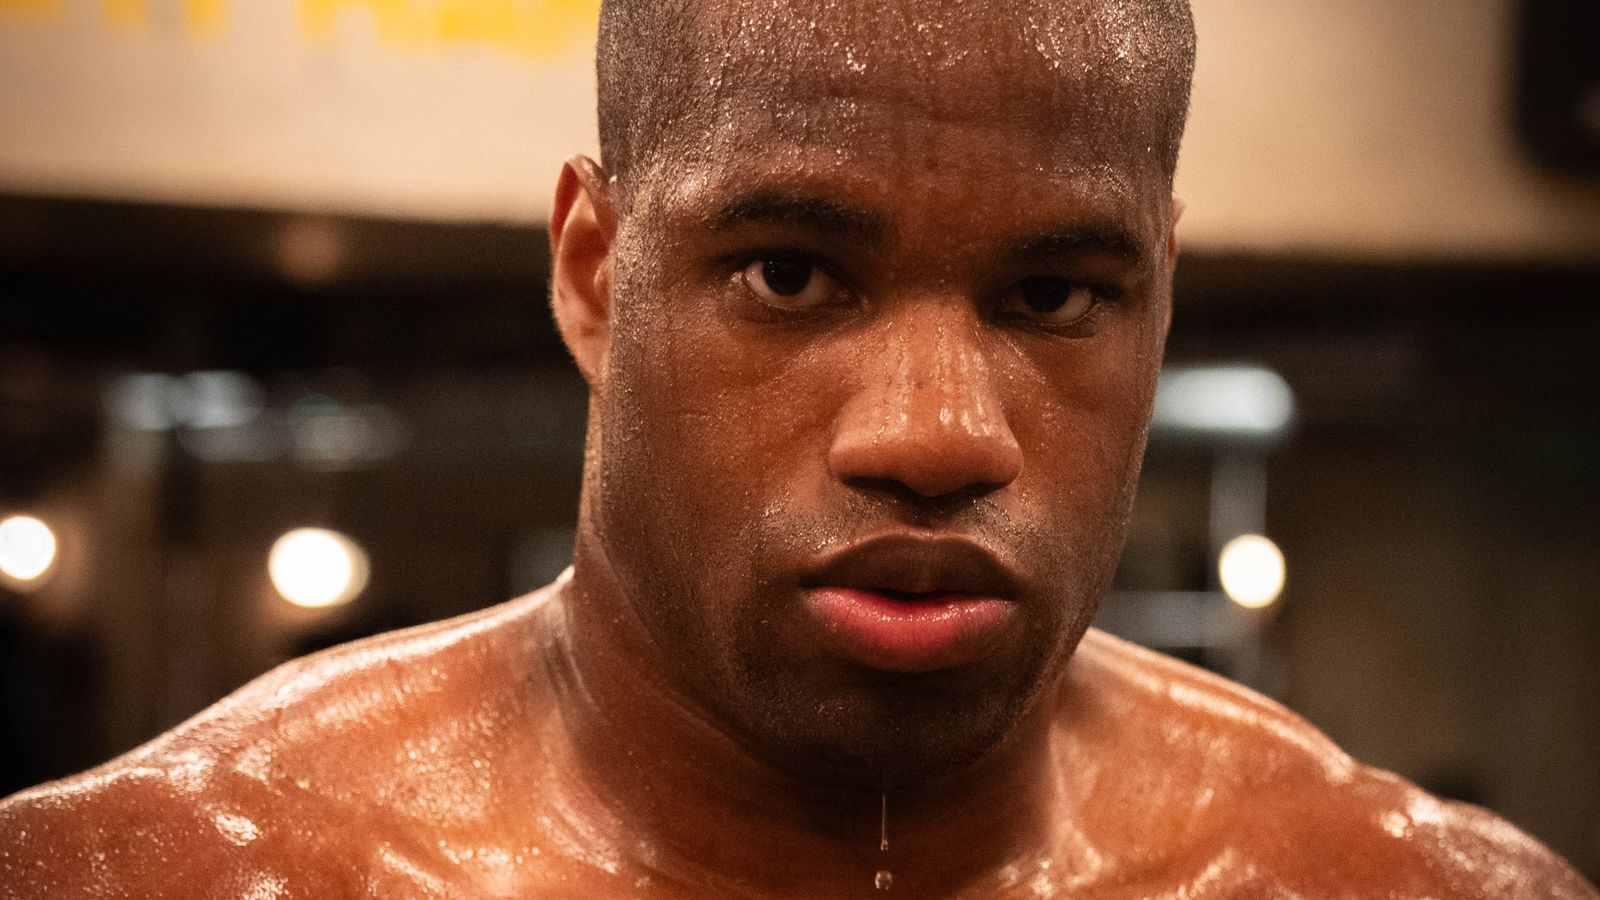 Daniel Dubois vows to ‘demolish’ Anthony Joshua if British heavyweights collide, potentially for IBF title | Boxing News